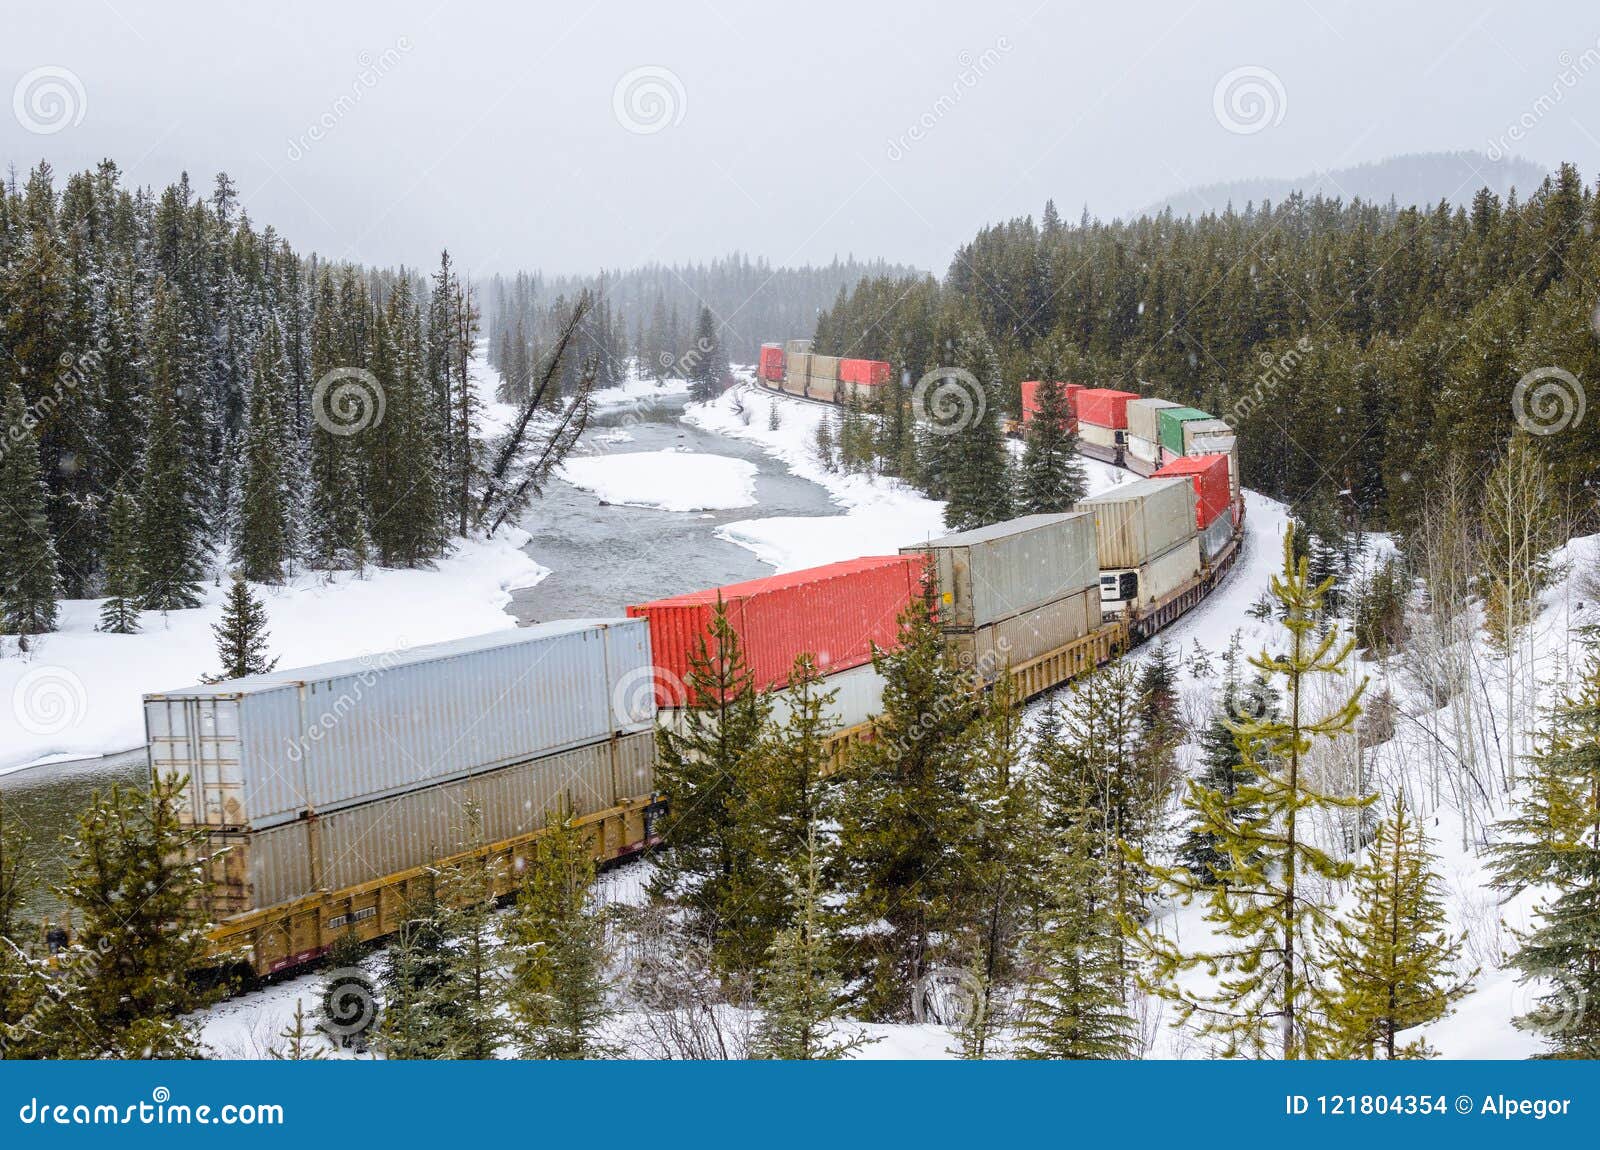 freight trainrunning alongside a river during a heavy snowfall